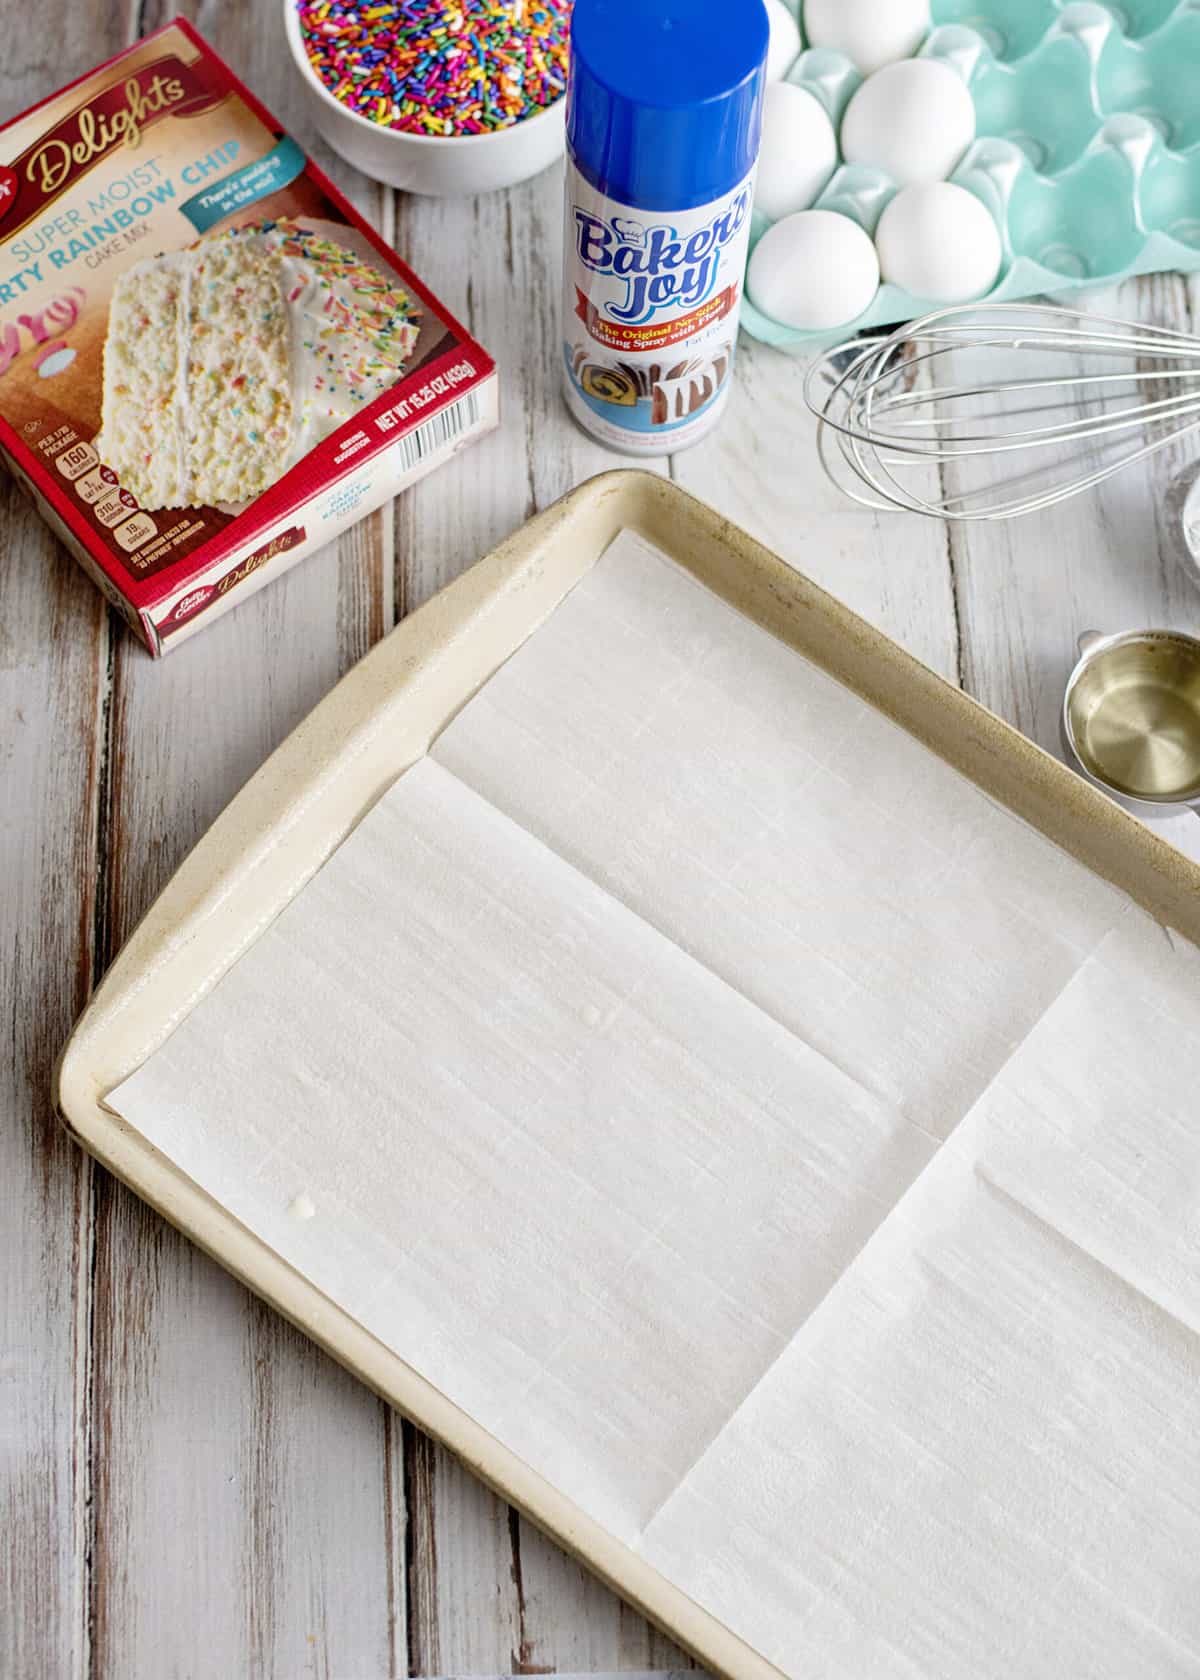 Prepare a jelly roll pan with spray and parchment paper.